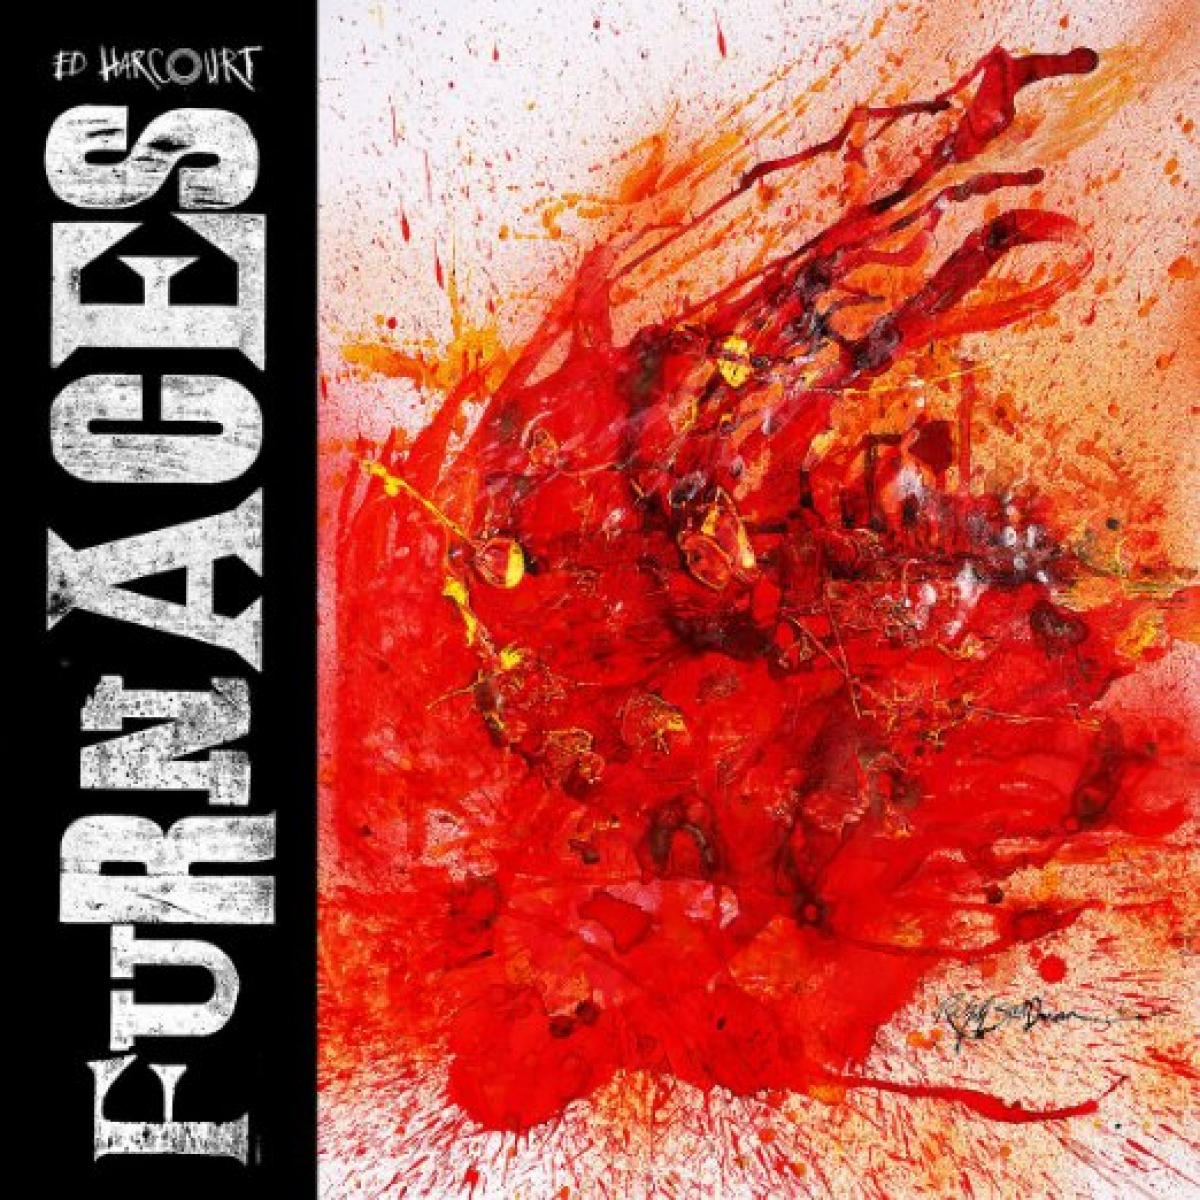 Ed Harcourt - Furnaces (Polydor, 2016)